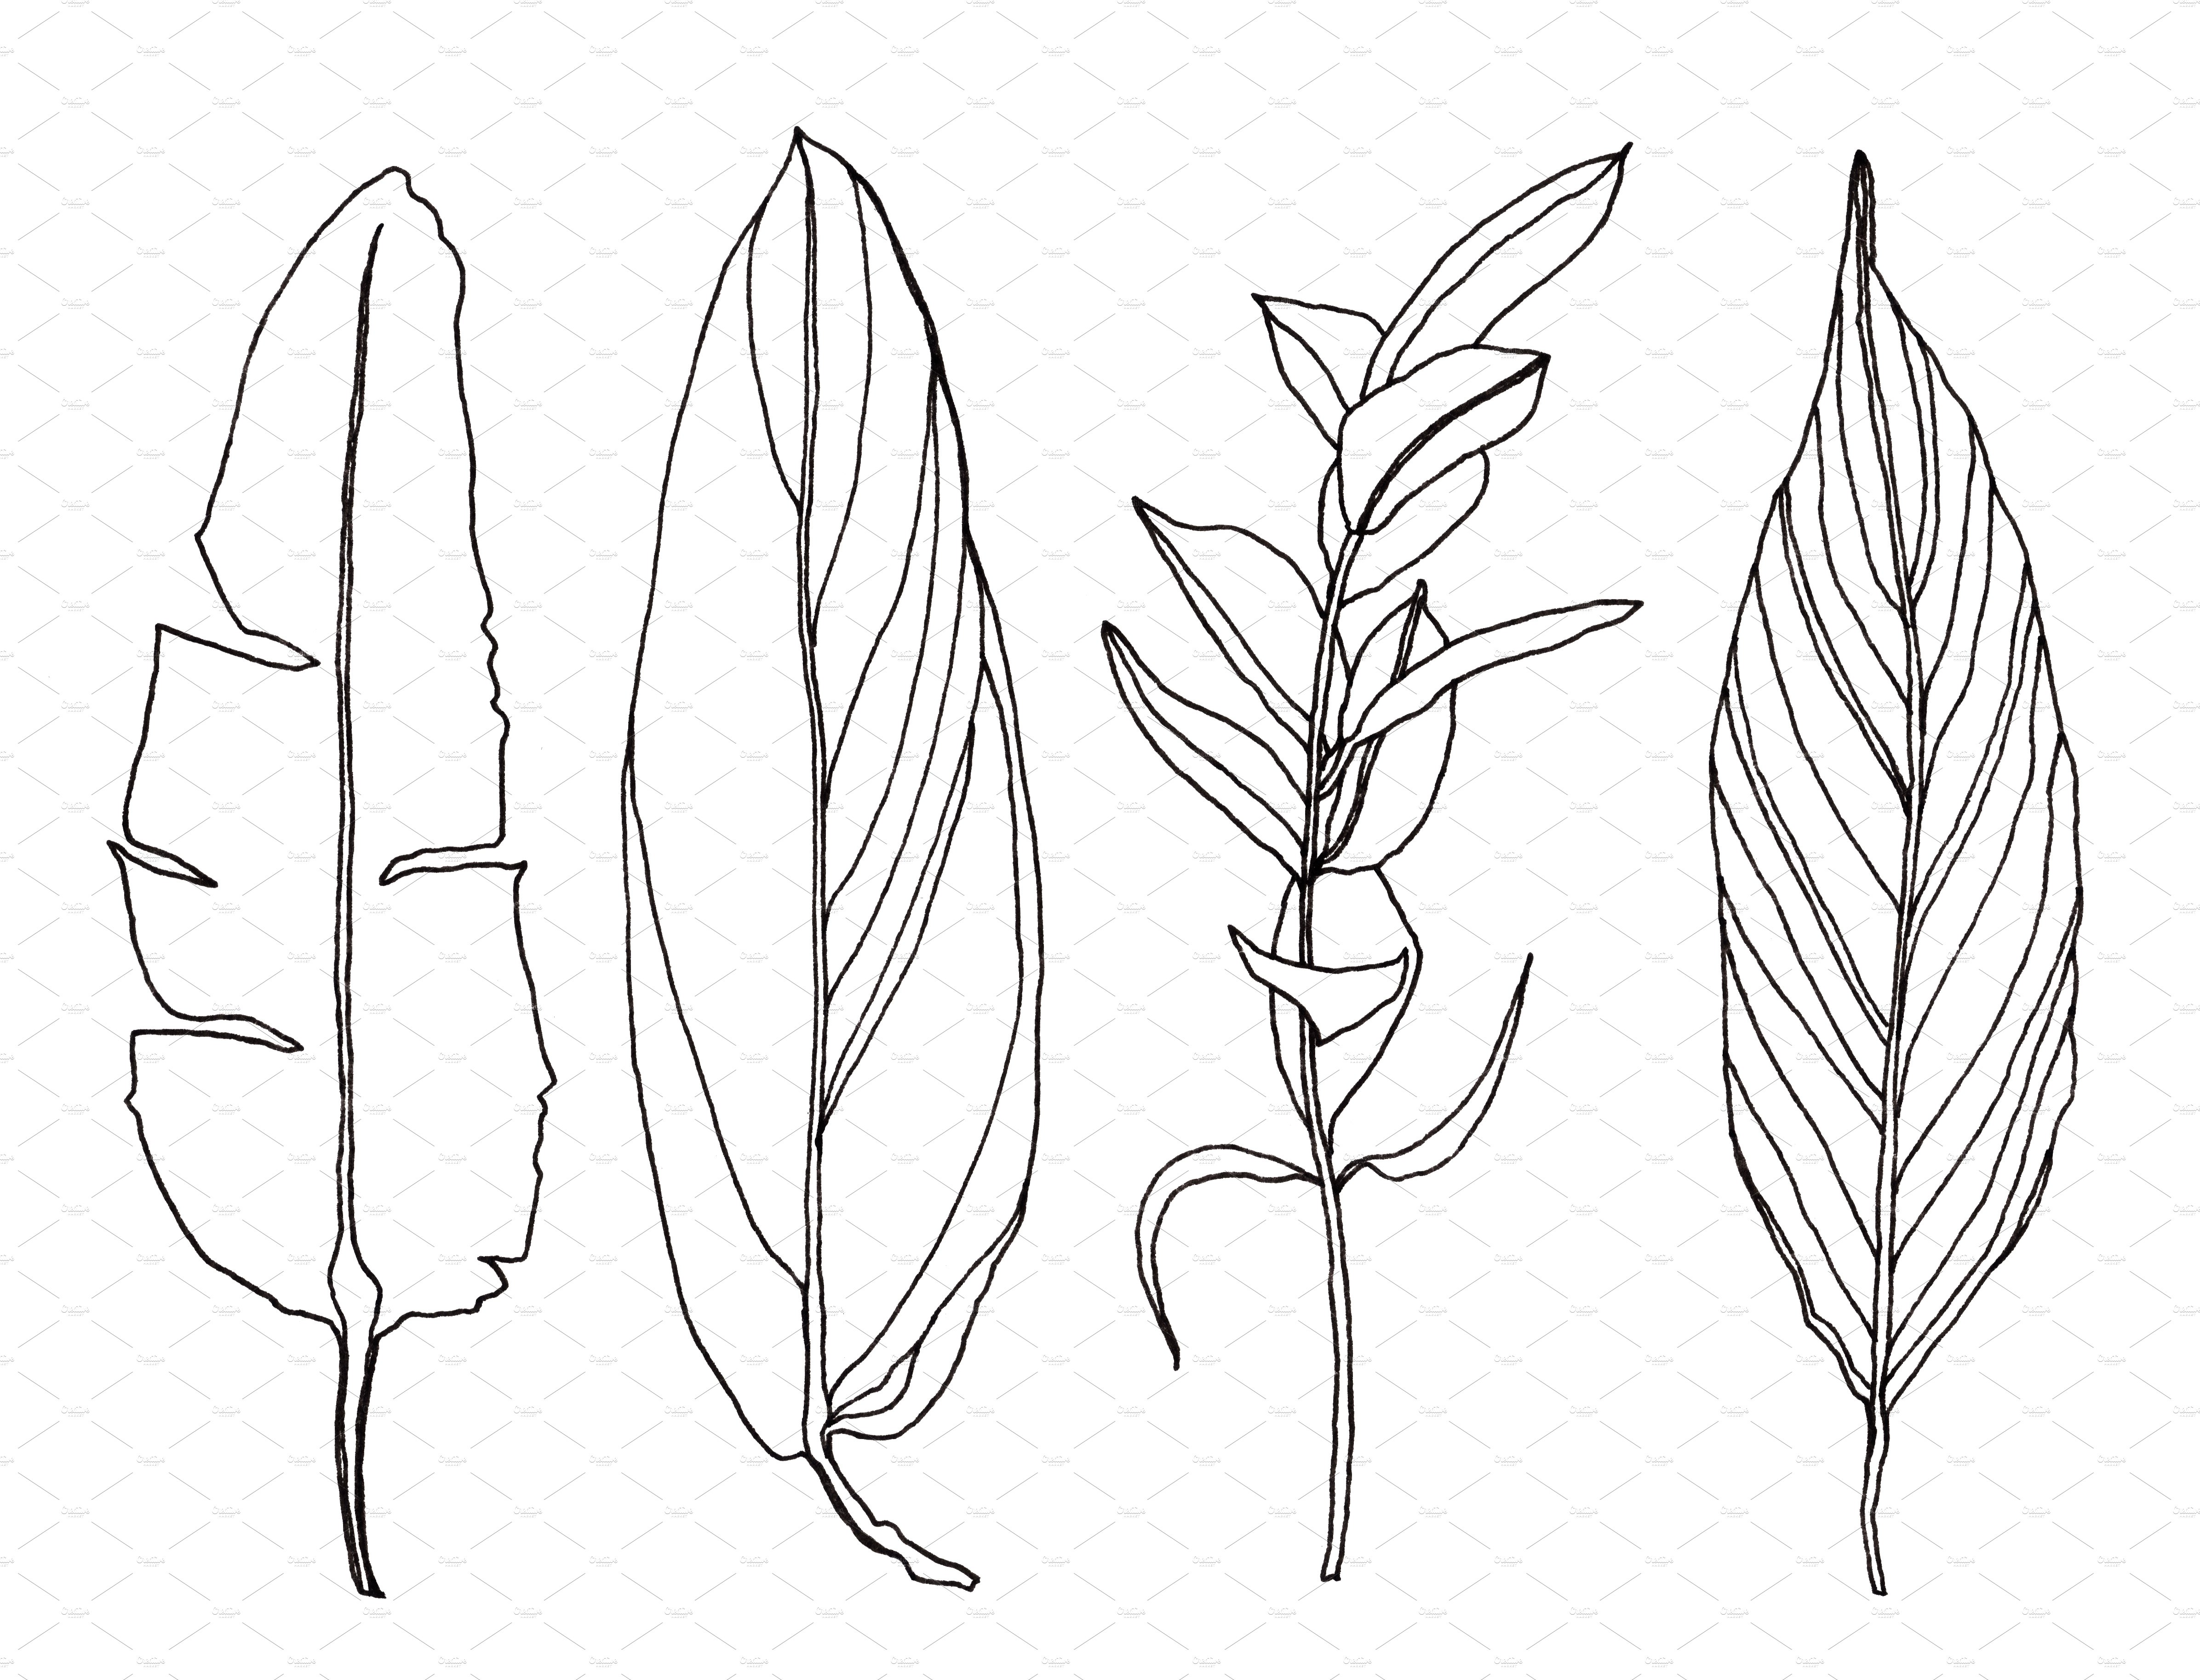 Line drawing of three different types of leaves.